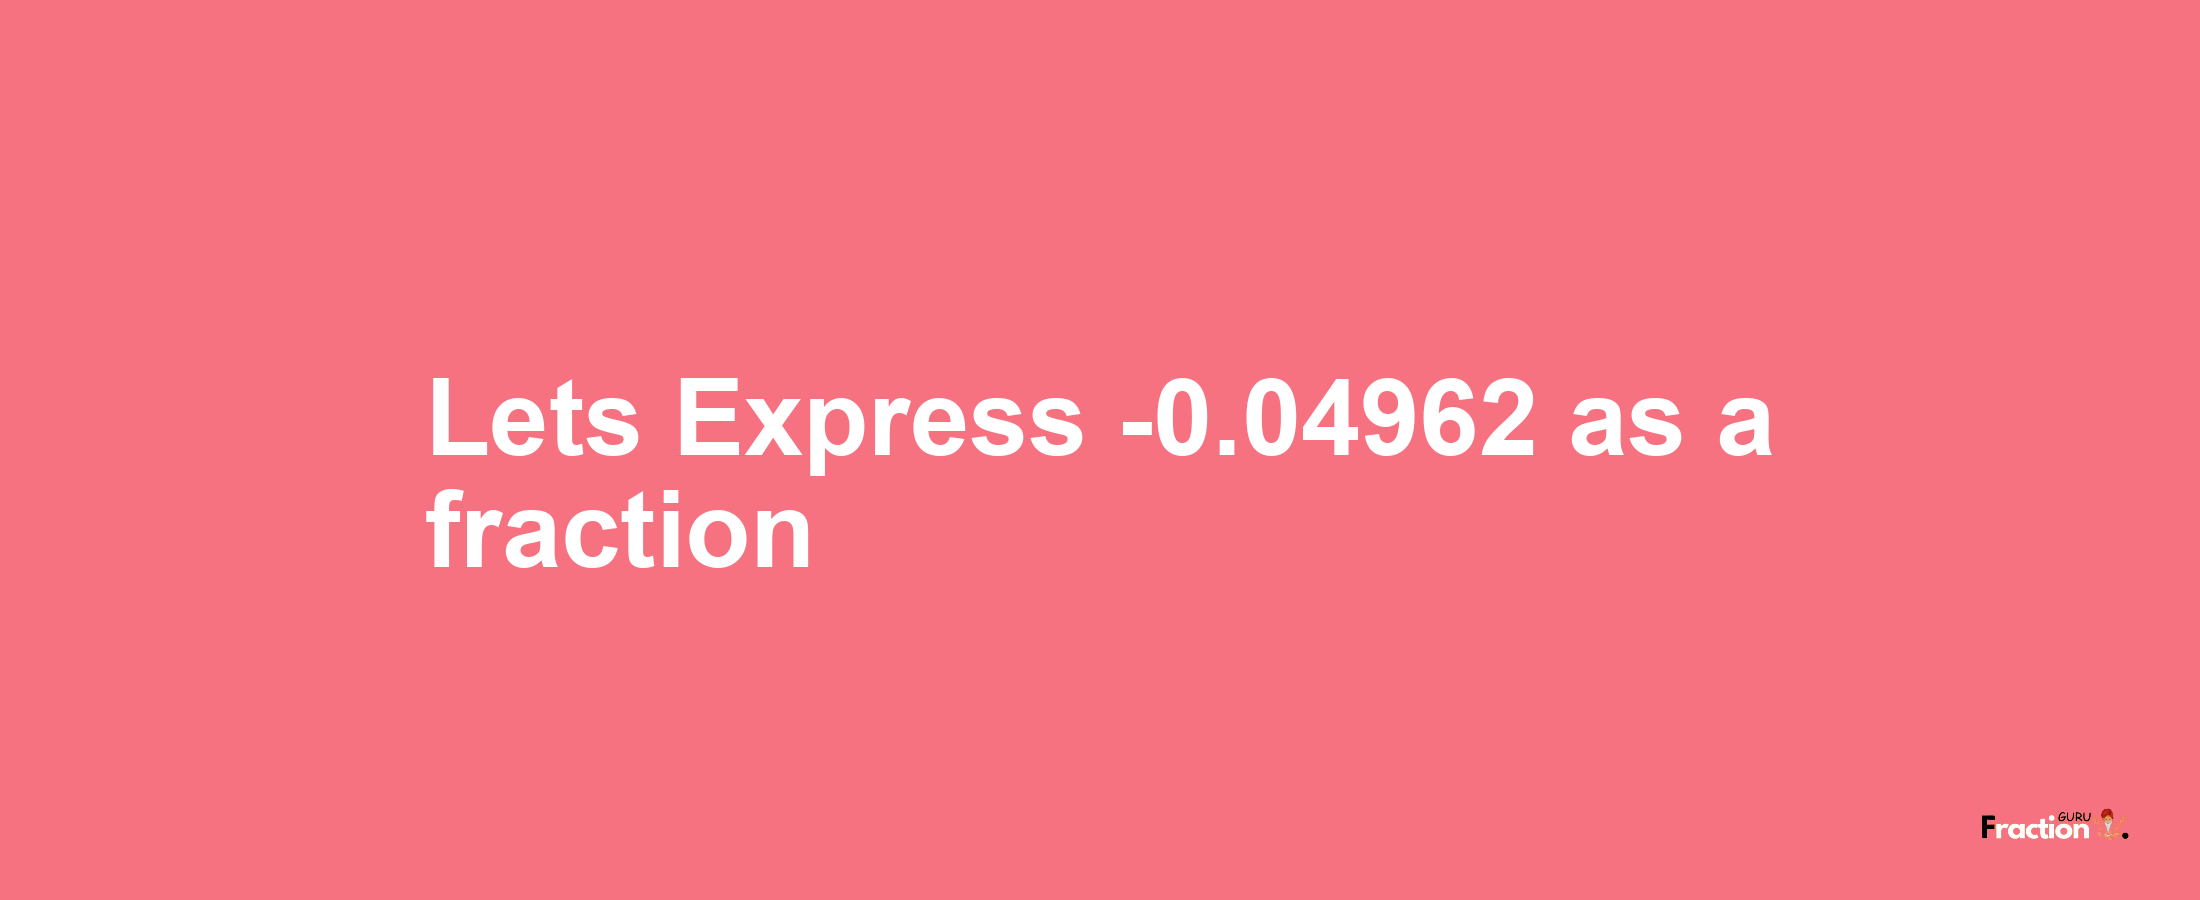 Lets Express -0.04962 as afraction